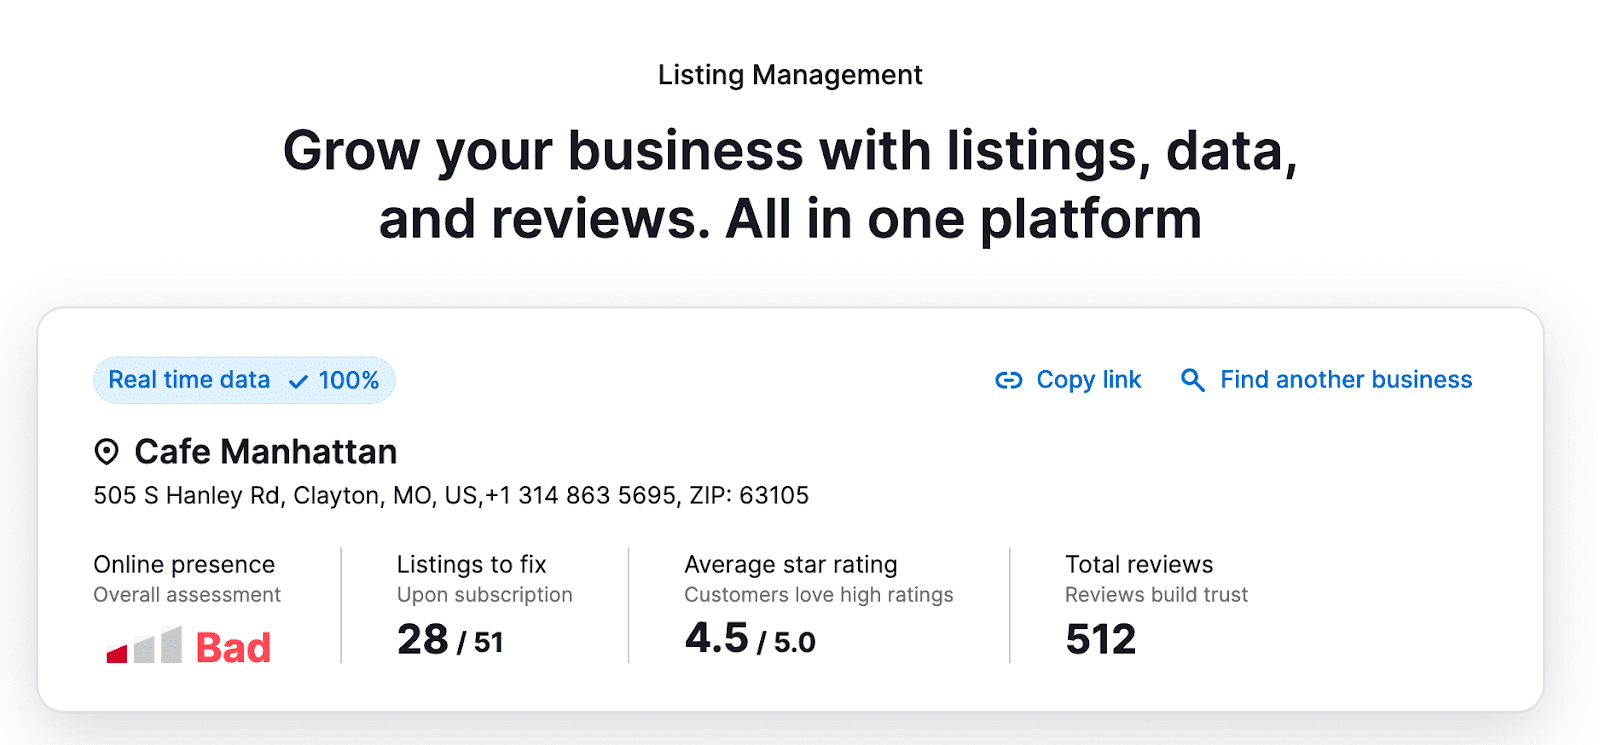 Listing Management tool results for "Cafe Manhattan"